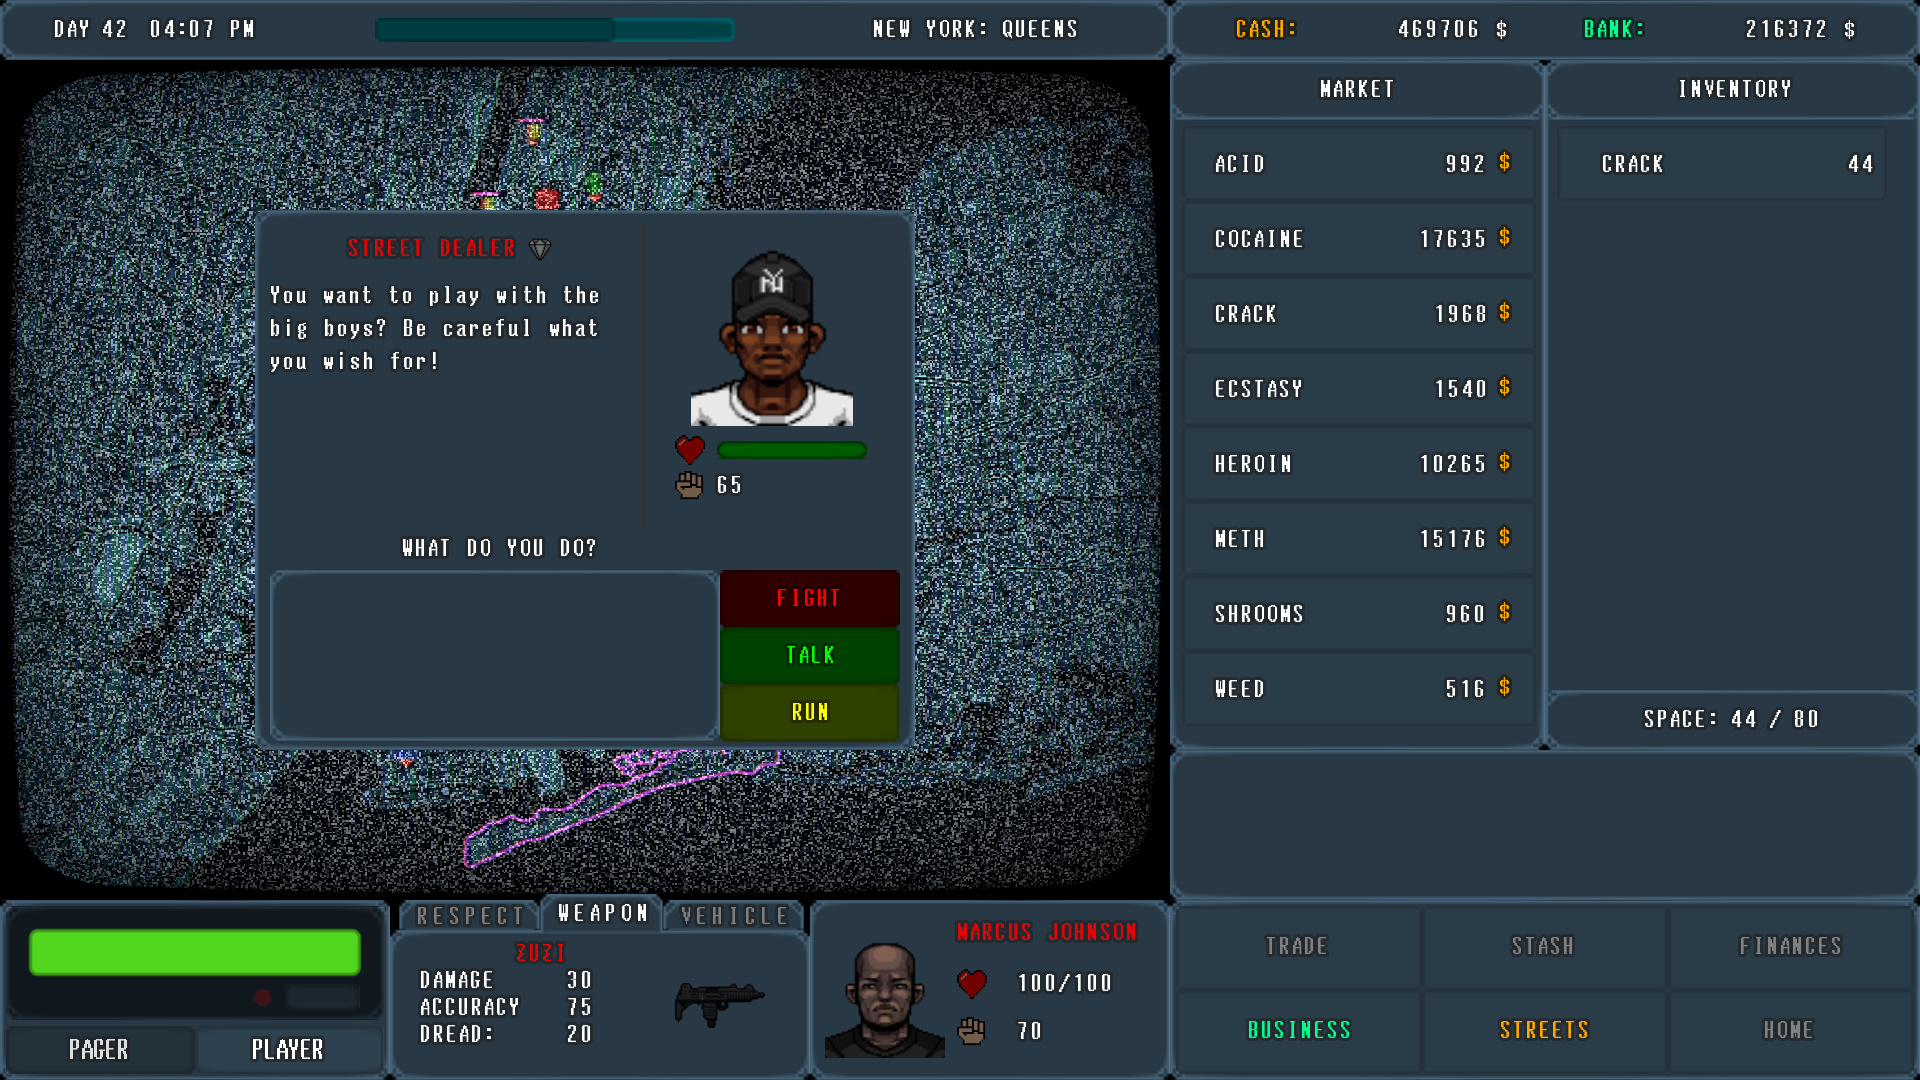 Screenshoot of game PUSHER - DRUG TYCOON showing fight with Street Dealer